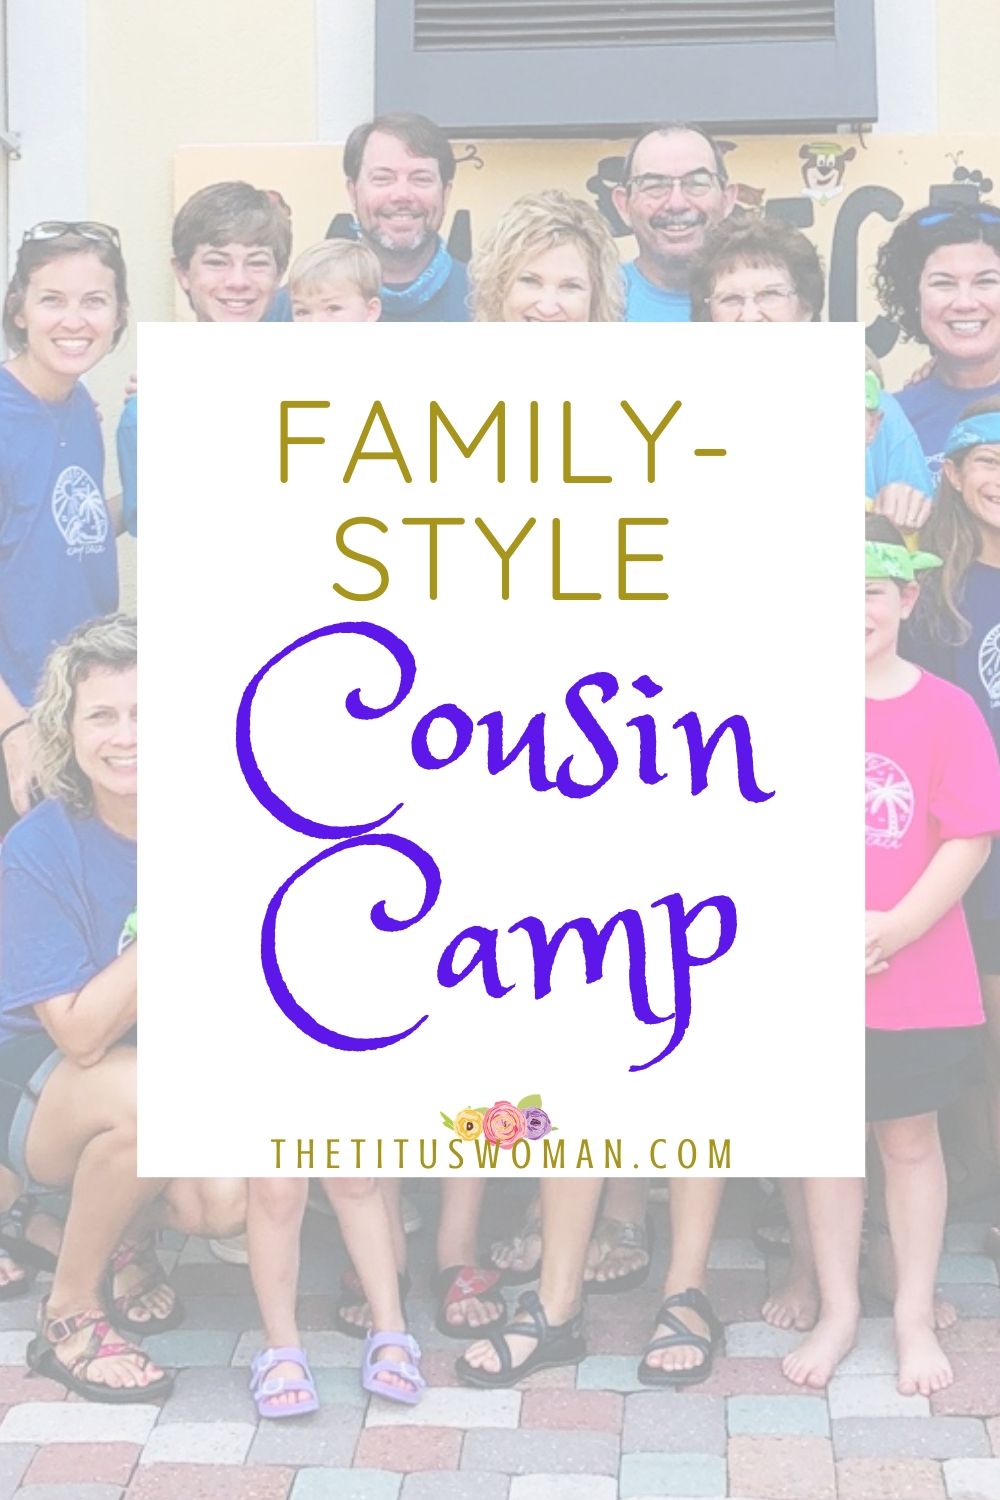 family-style cousin camp